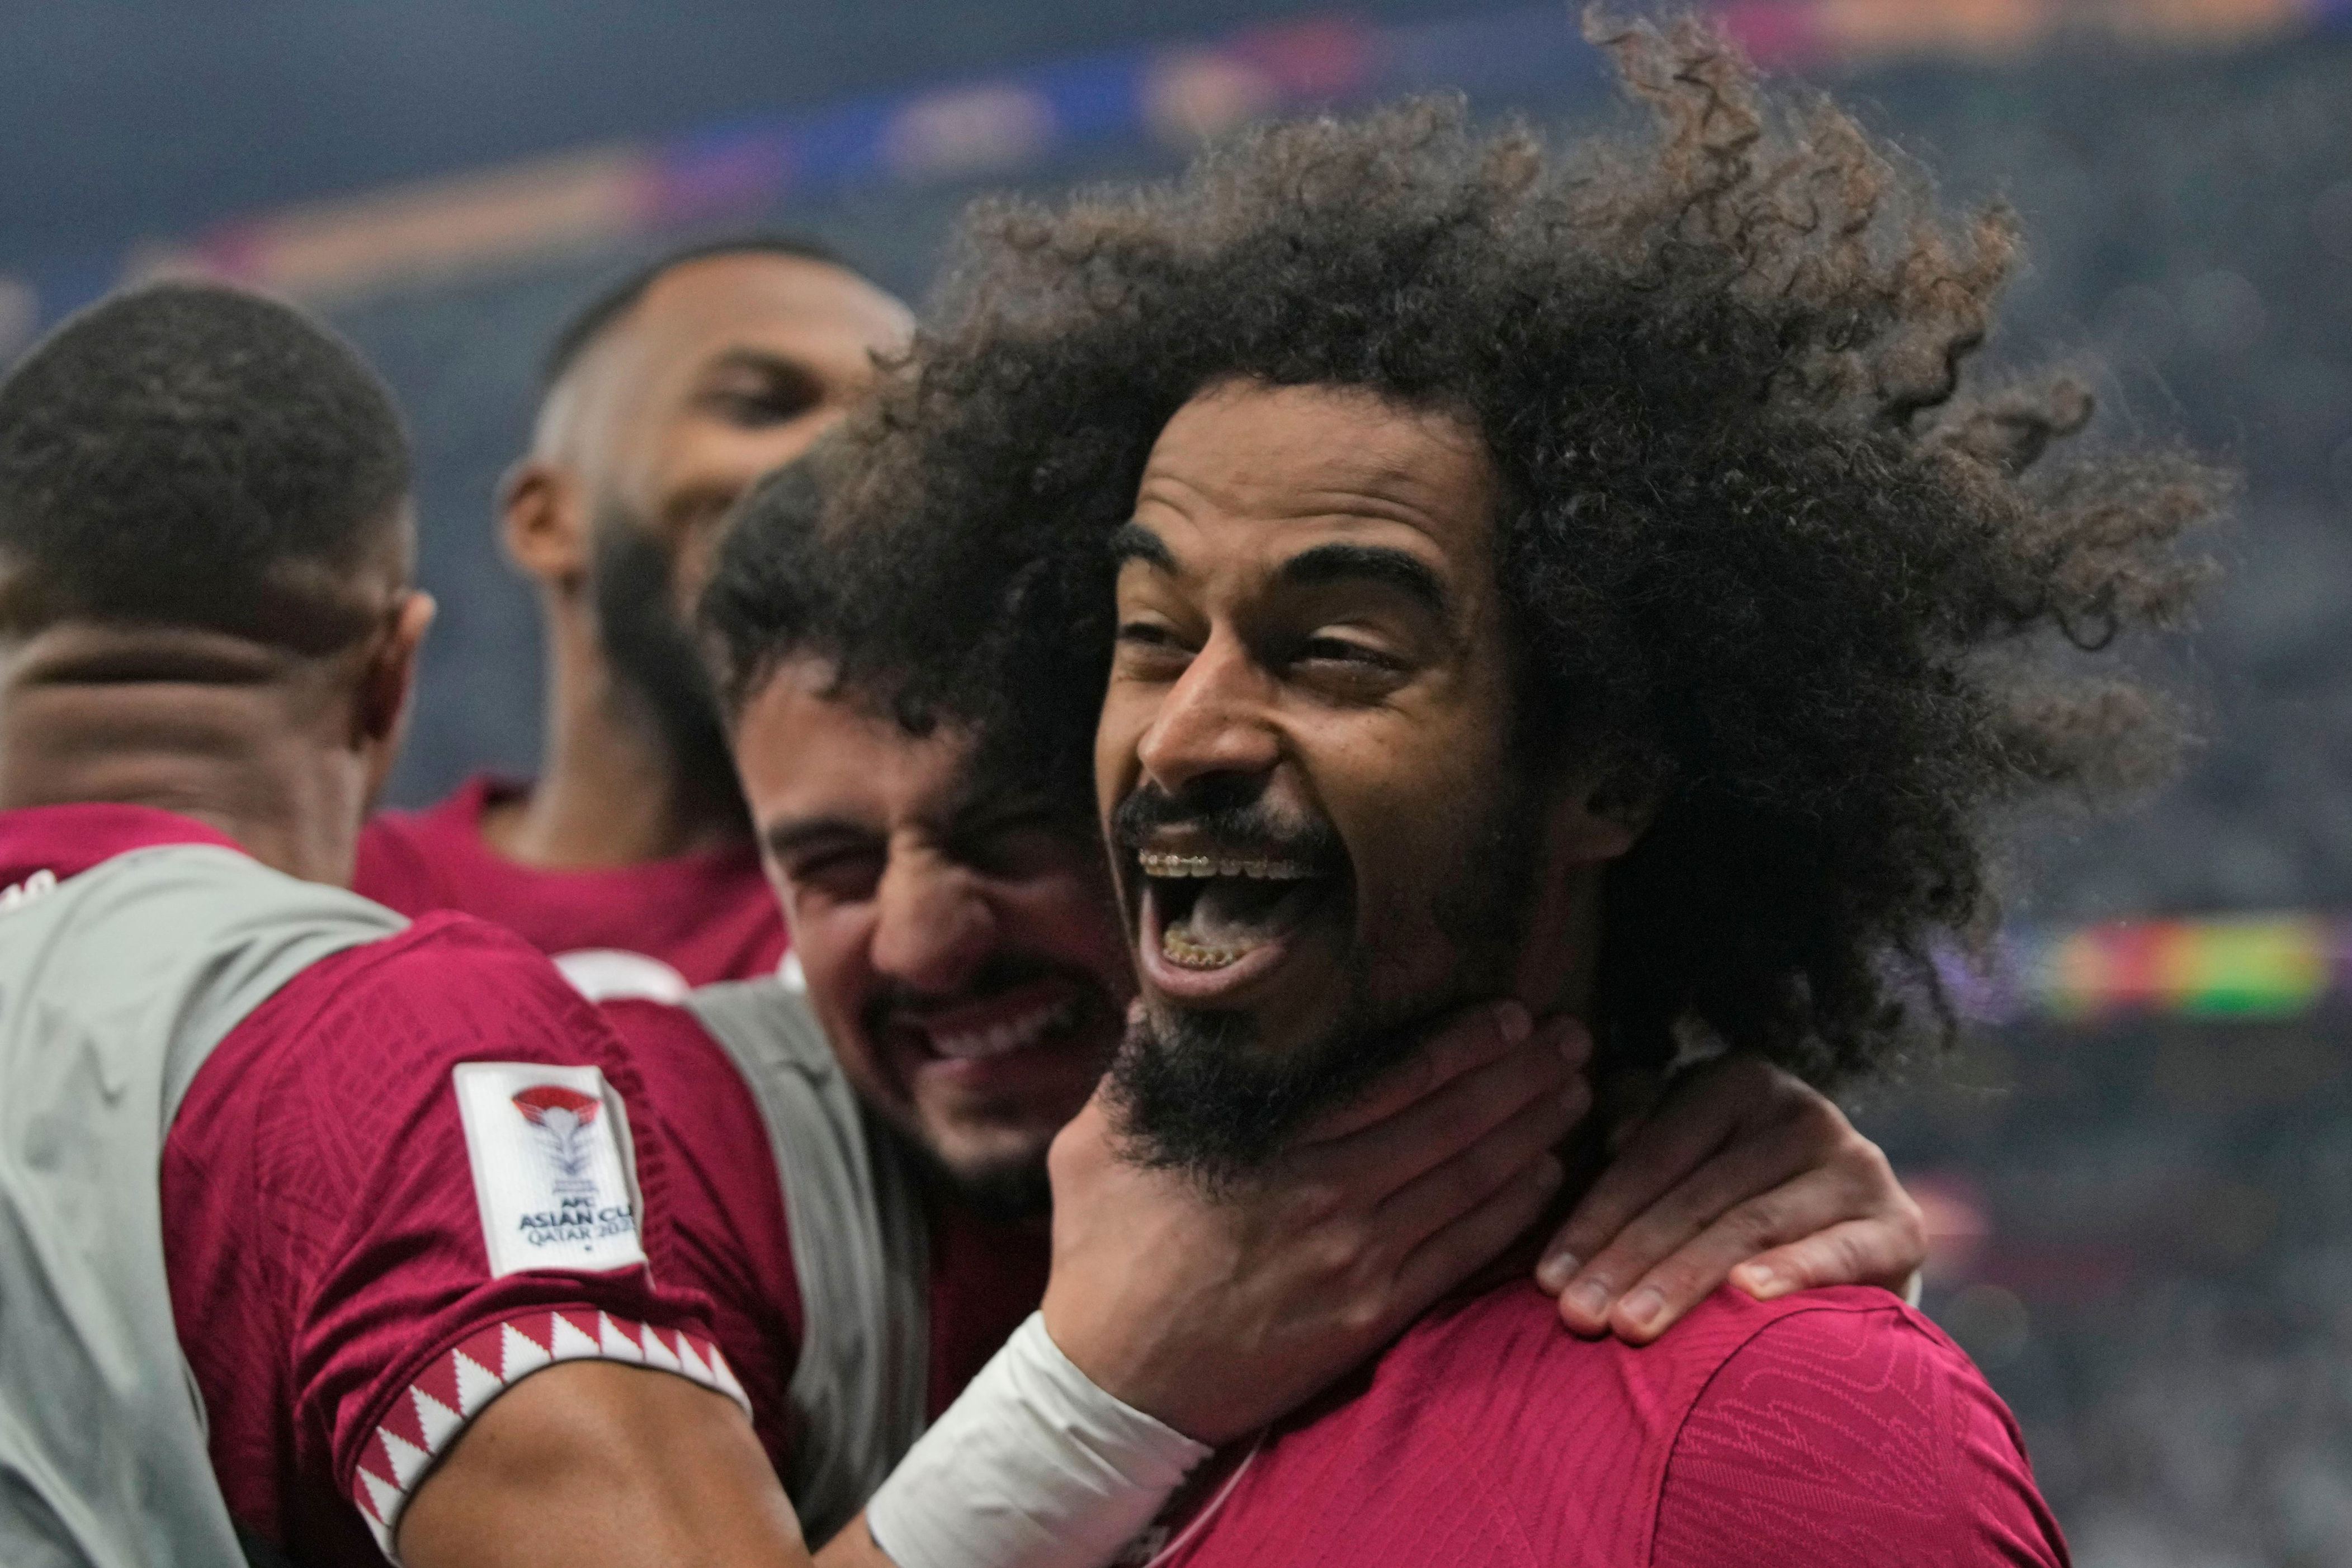 akram afif: qatar's asian cup hero says he would 'love' to play in europe